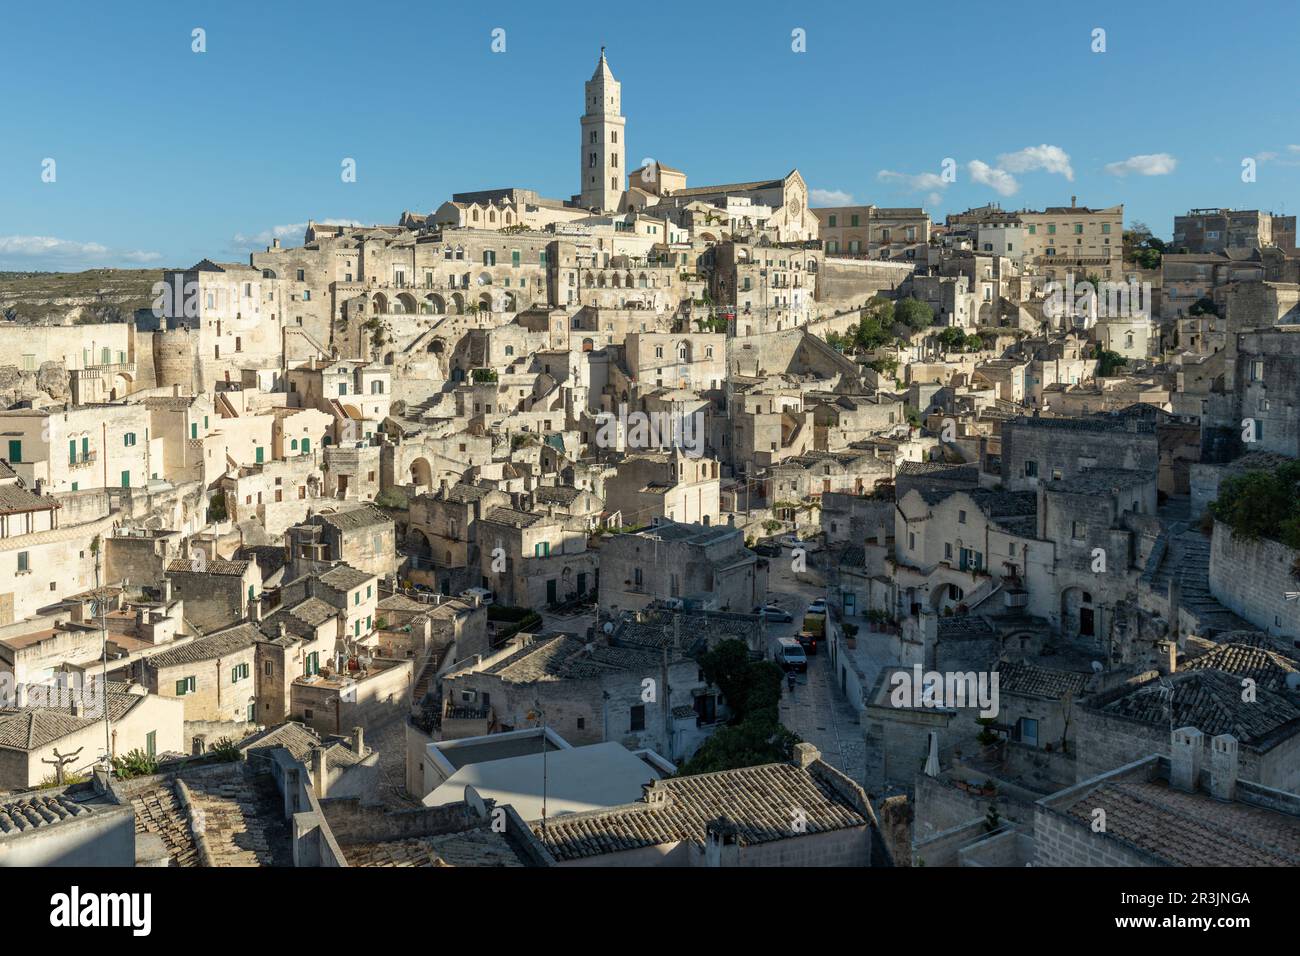 The historic town of Matera in Southern Italy Stock Photo